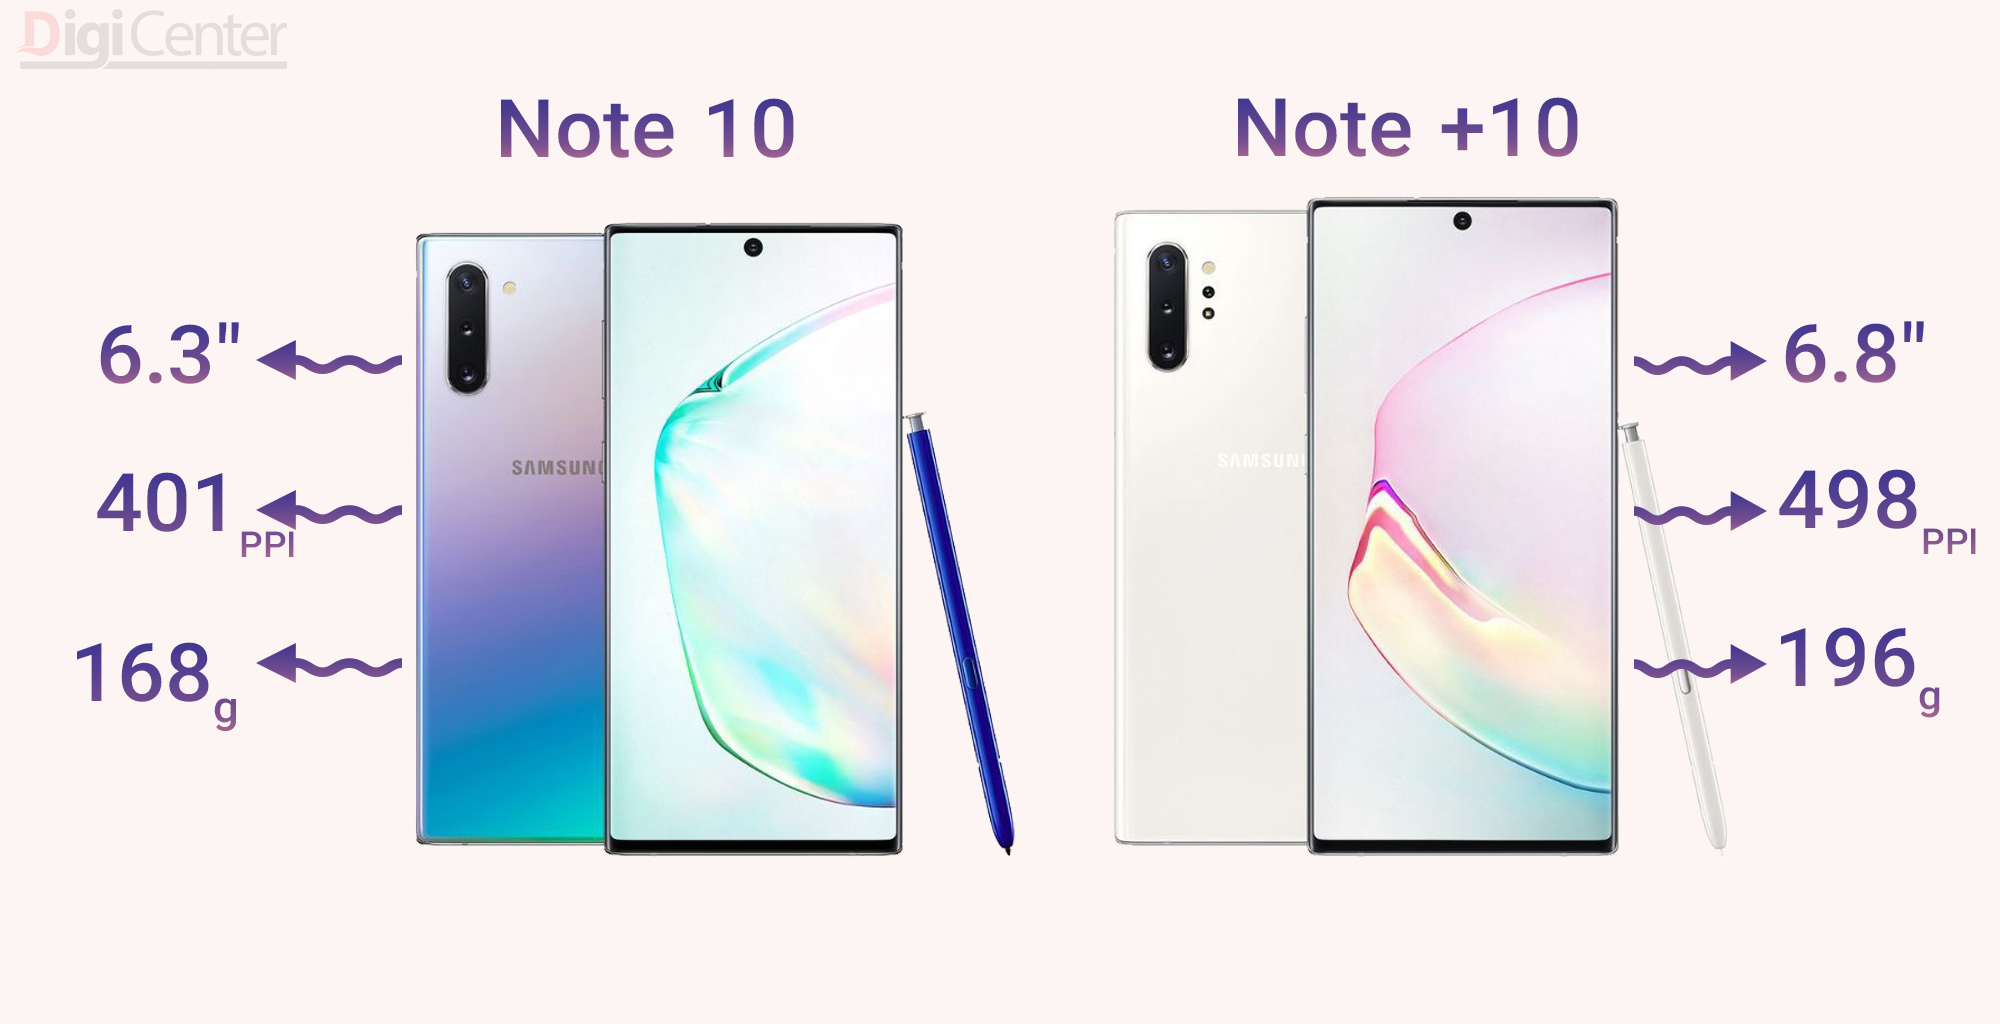 Galaxy Note 10 Note +10